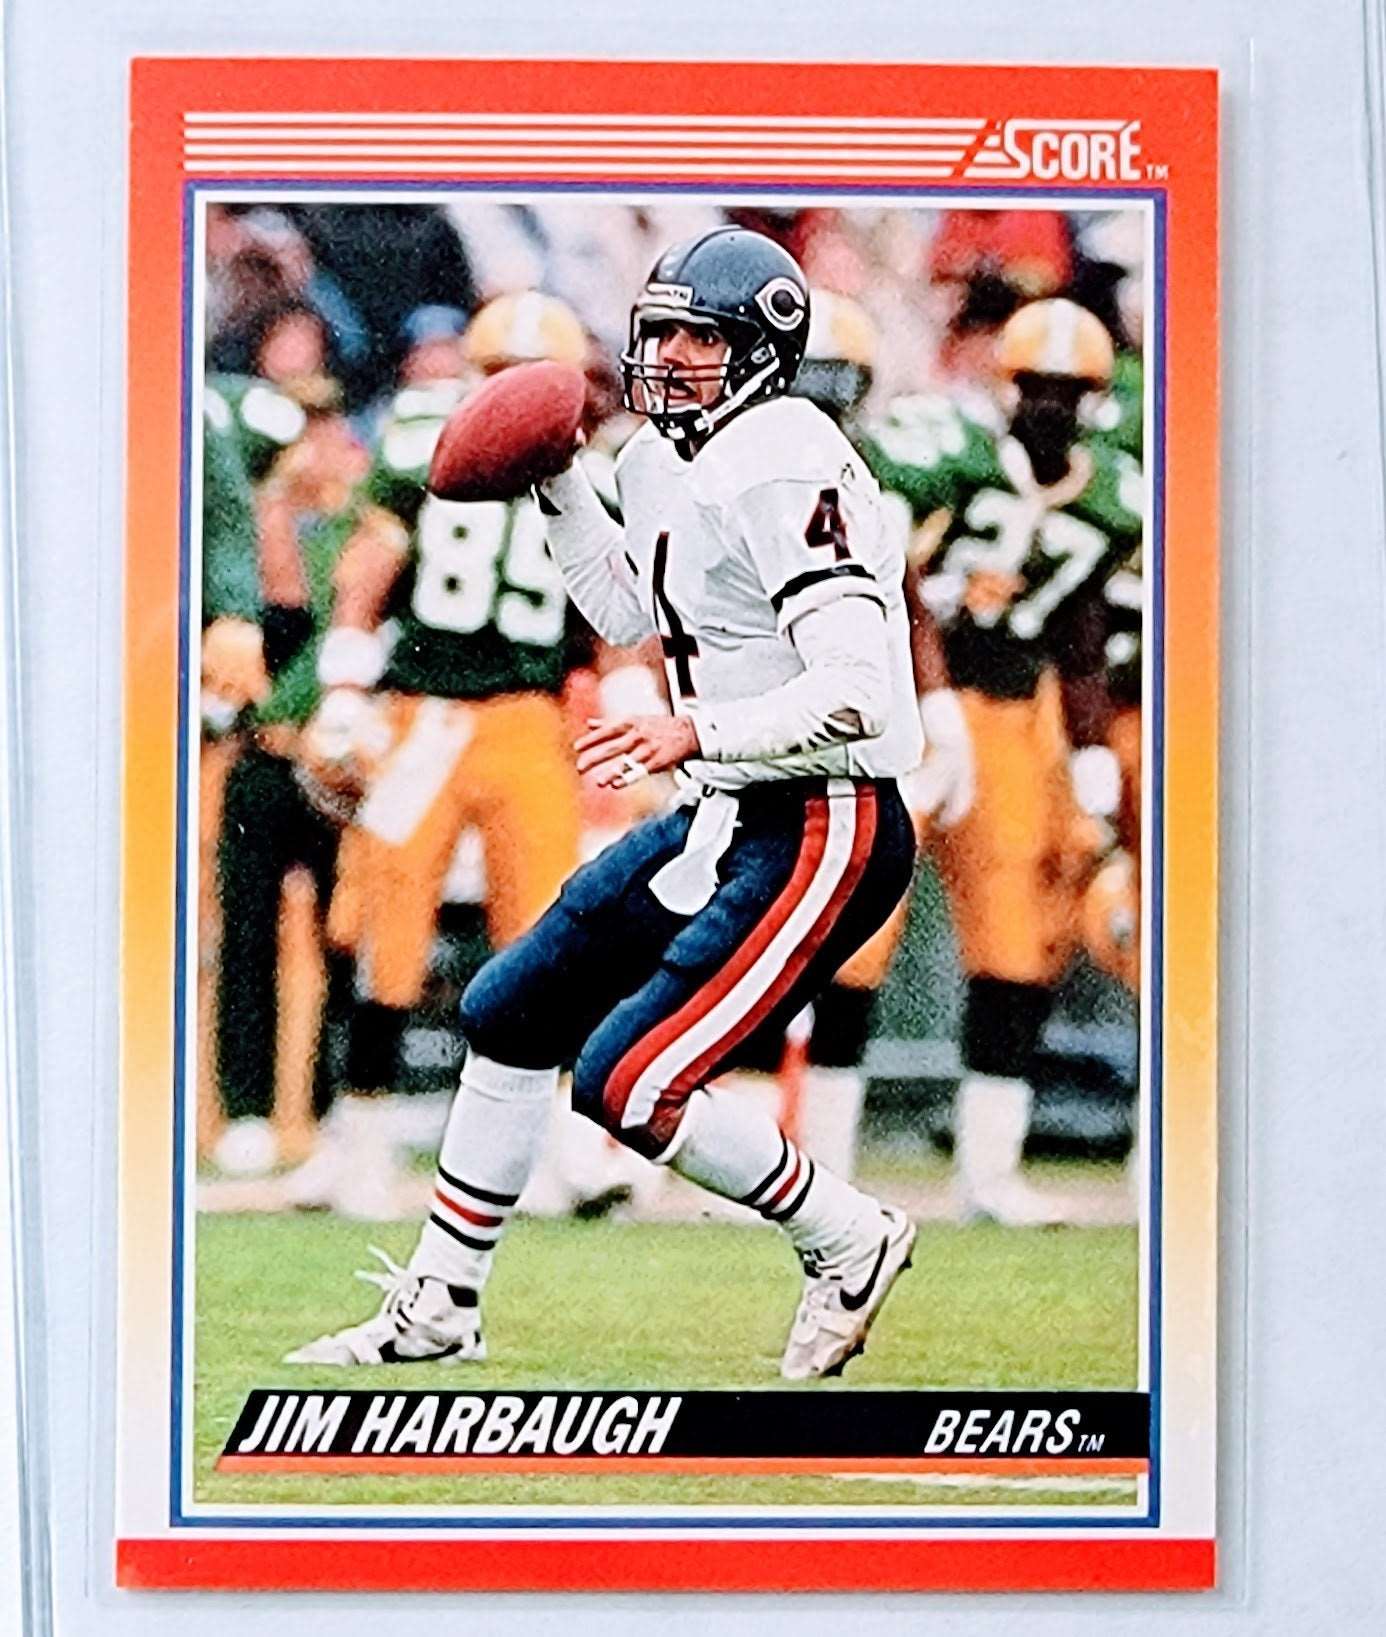 1990 Score Jim Harbaugh Football Card AVM1 simple Xclusive Collectibles   